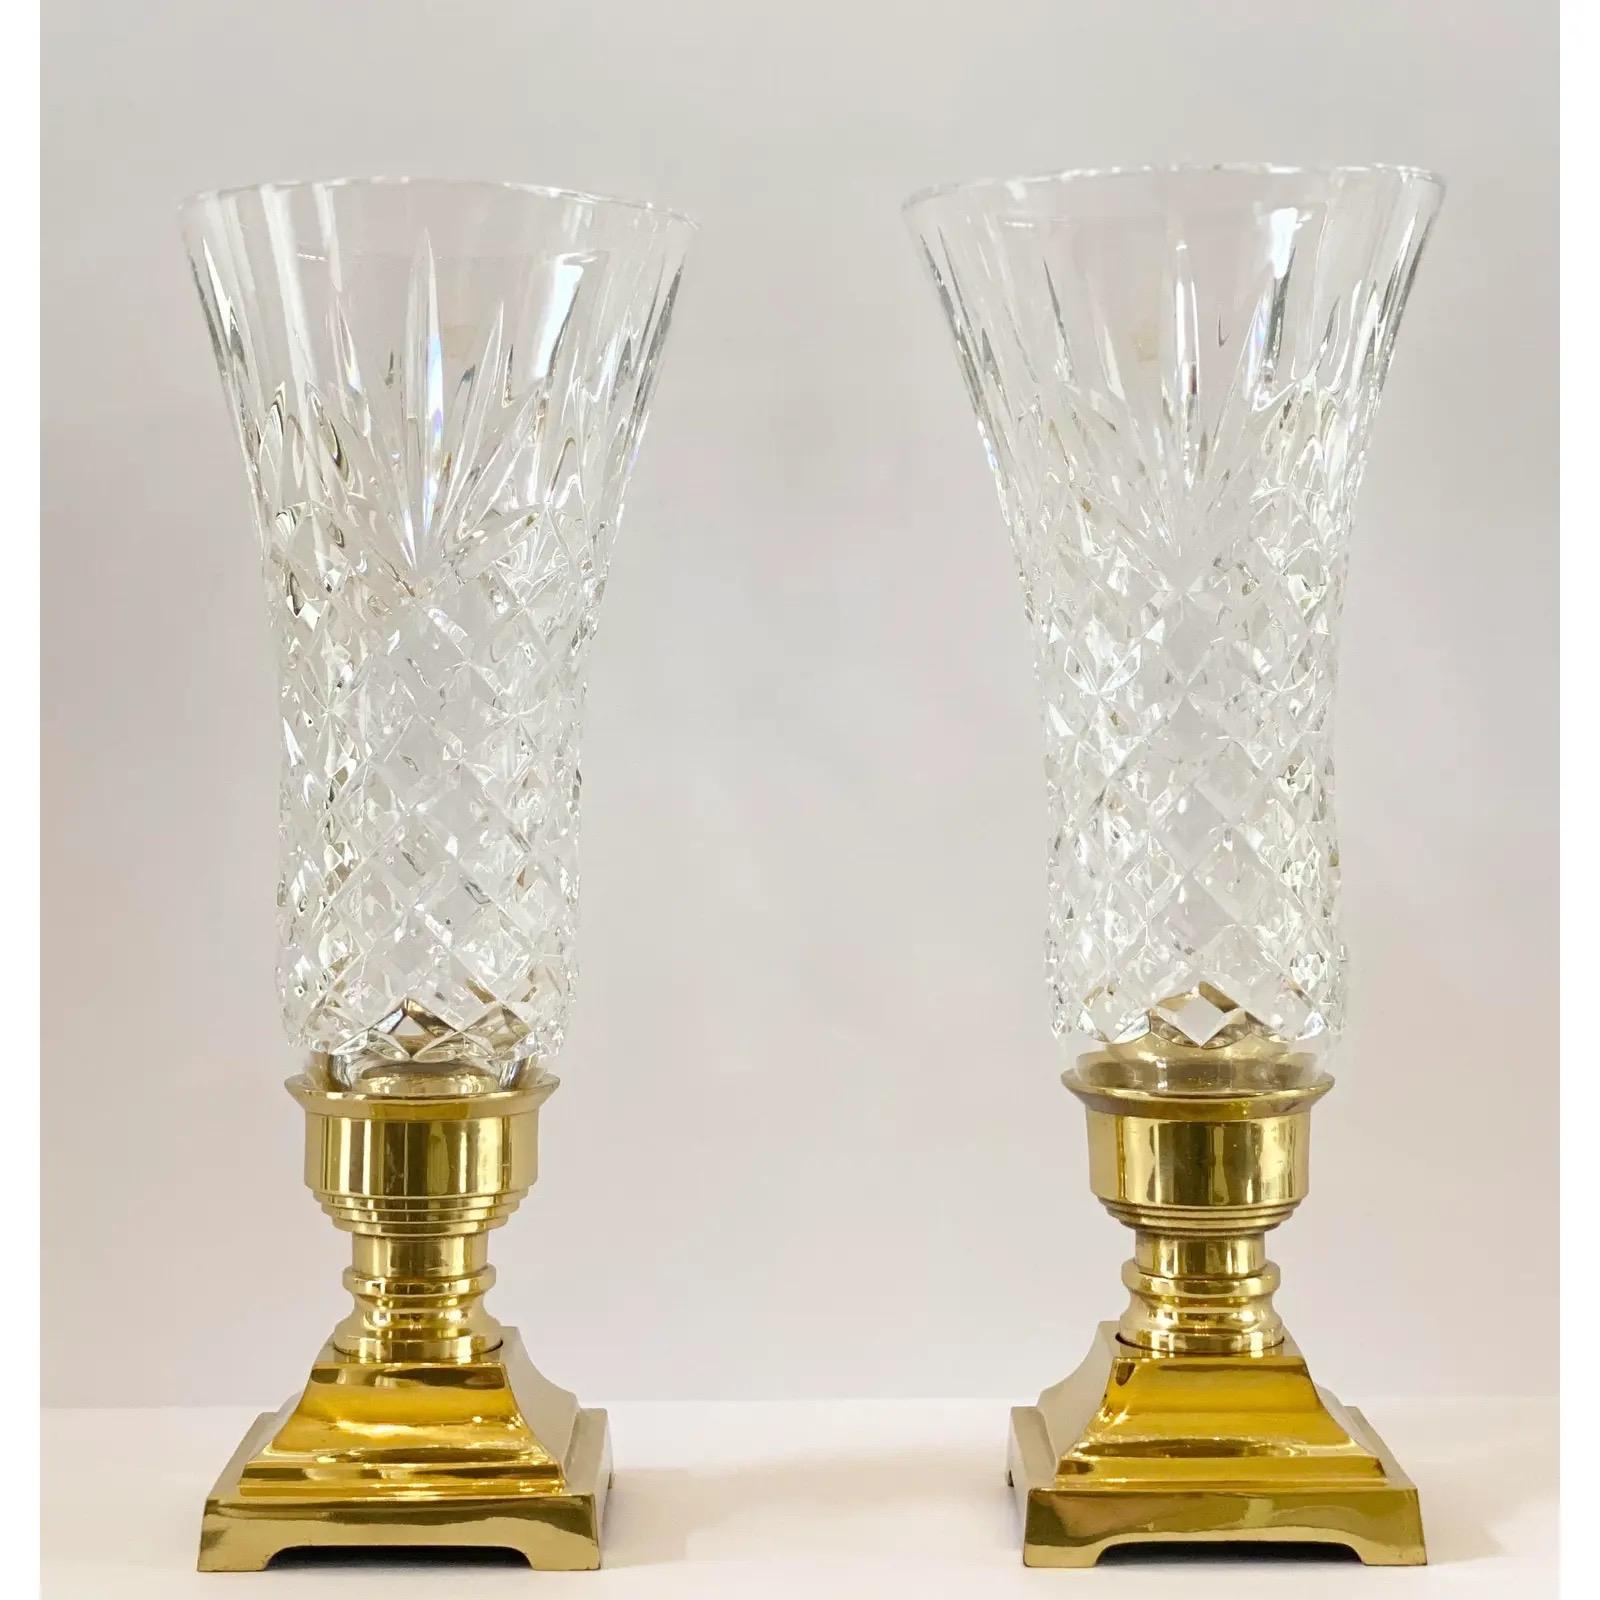 We are very pleased to offer a rare and sophisticated pair of candle holders by Stiffel, made in Poland, circa late 20th Century. This stunning pair showcases a brass square base with a crystal globe in a dazzling notched-rim diamond design. In